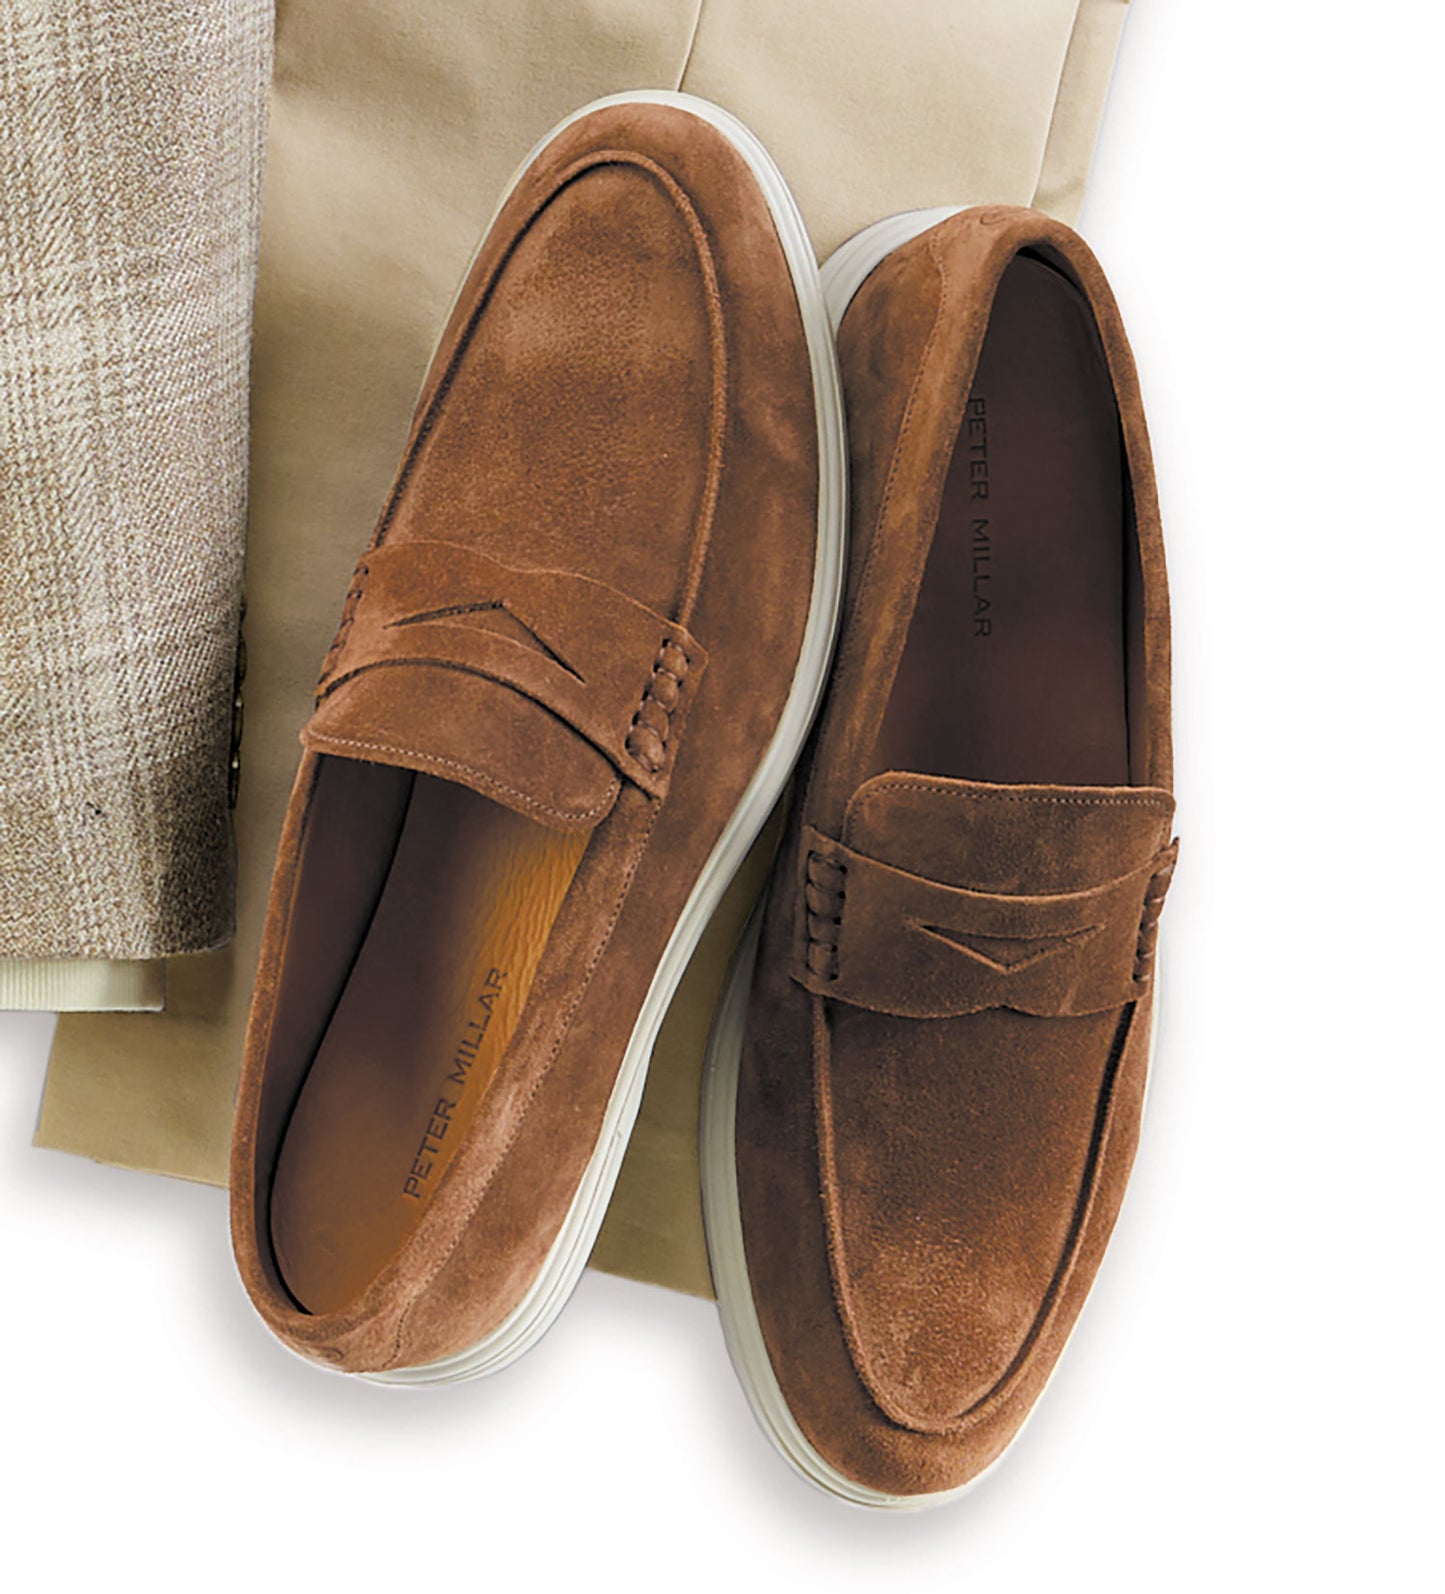 Peter Millar Excursionist Penny Loafer